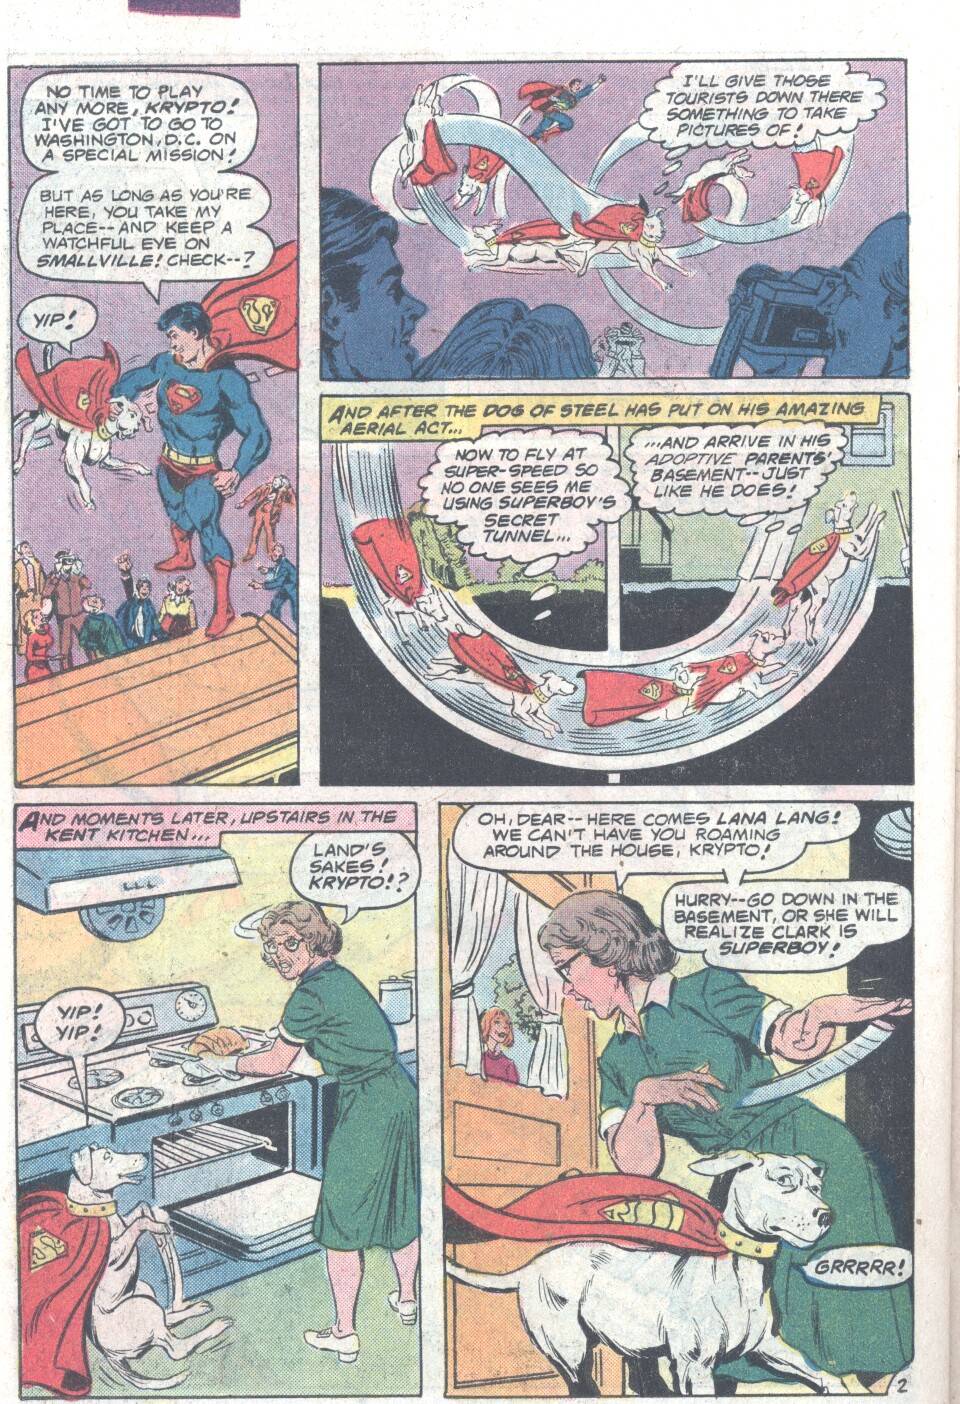 The New Adventures of Superboy 10 Page 19